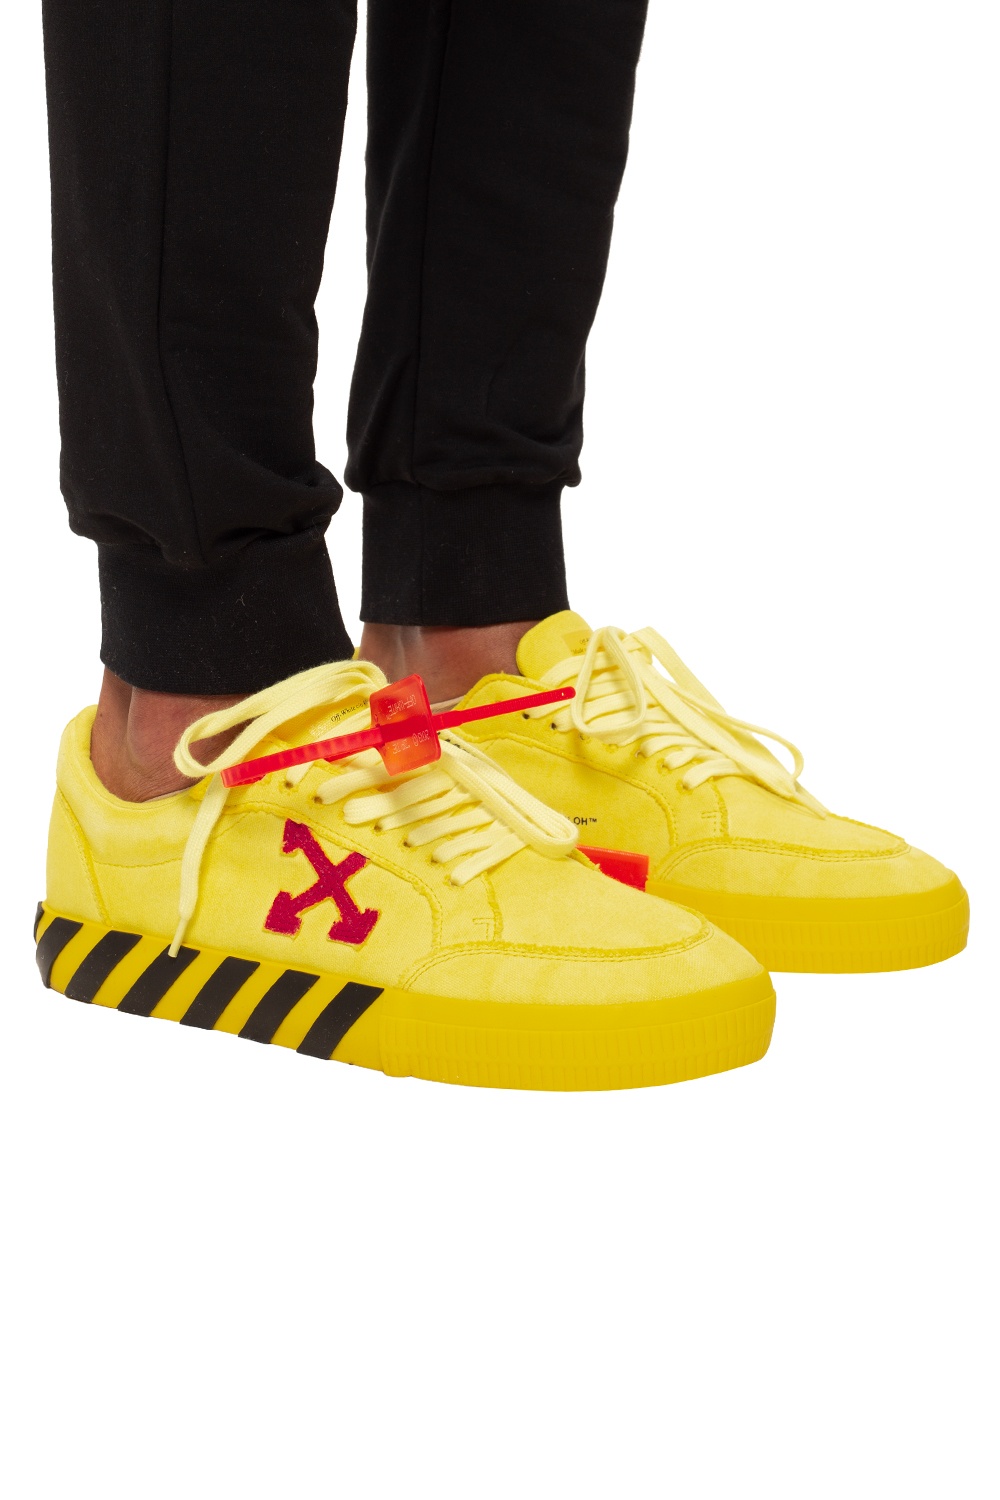 off+white+yellow+sneakers Promotions